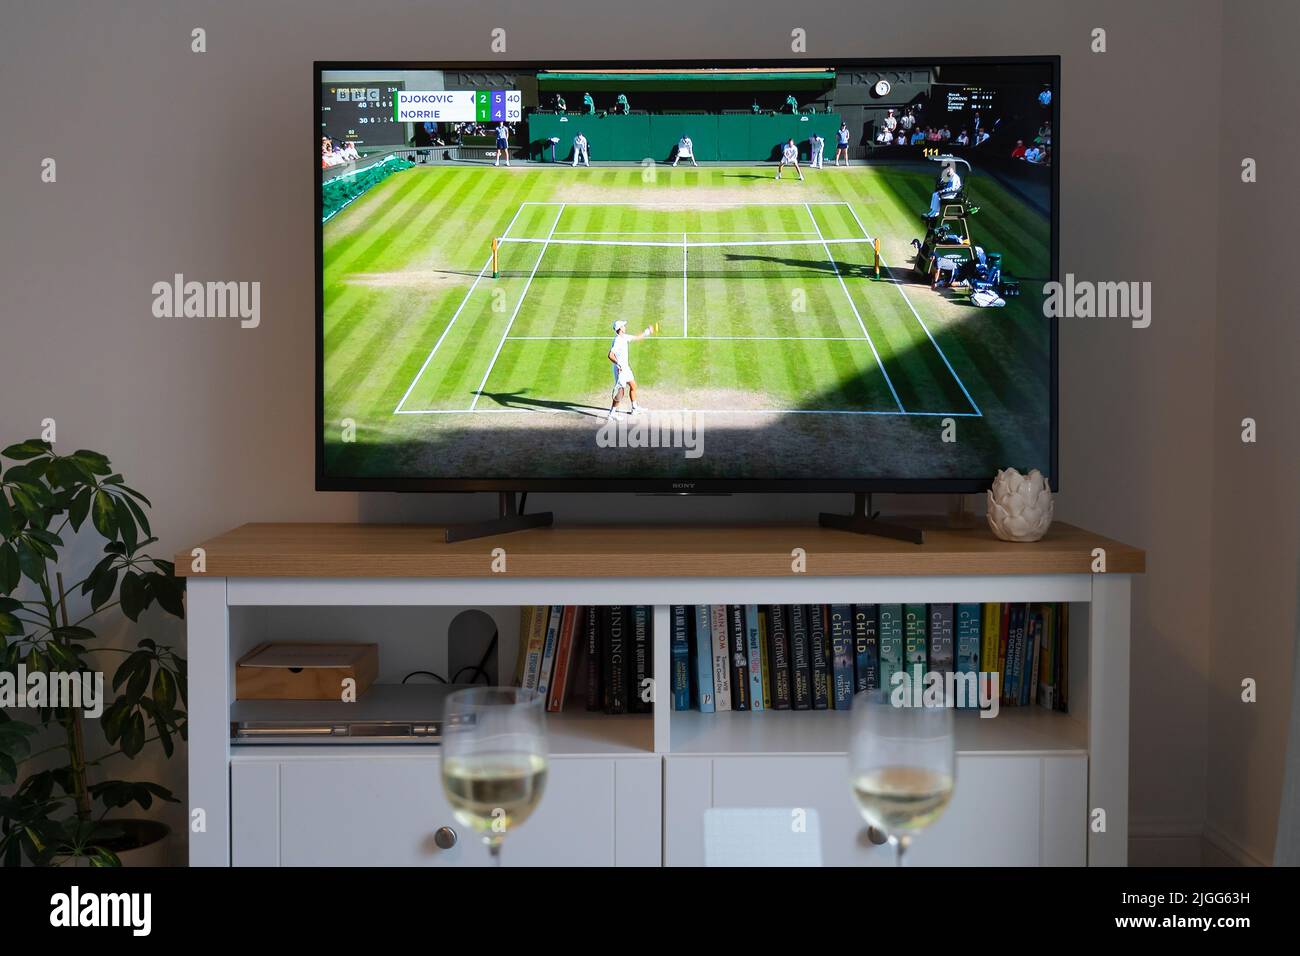 Novak Djokovic serves against Cameron Norrie at Wimbledon 2022 men's tennis singles semi final on 8th July 2022 on a tv in a lounge. UK Stock Photo